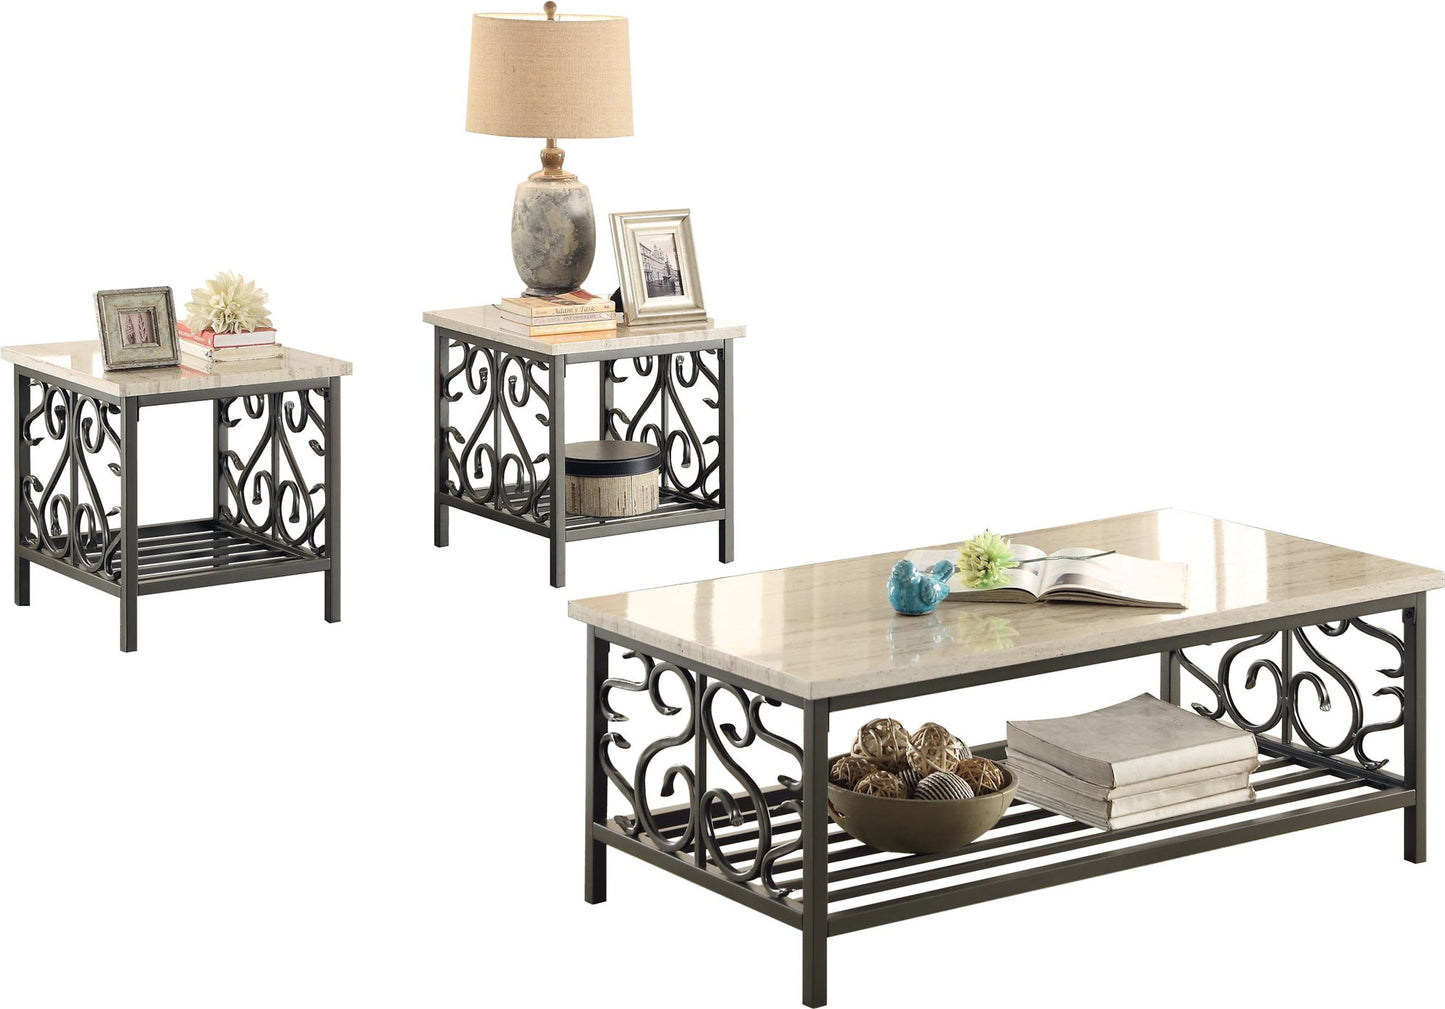 Homelegance Fairhope 3PC Occasional Tables with Faux Marble Top Cocktail Table, 2 End Table